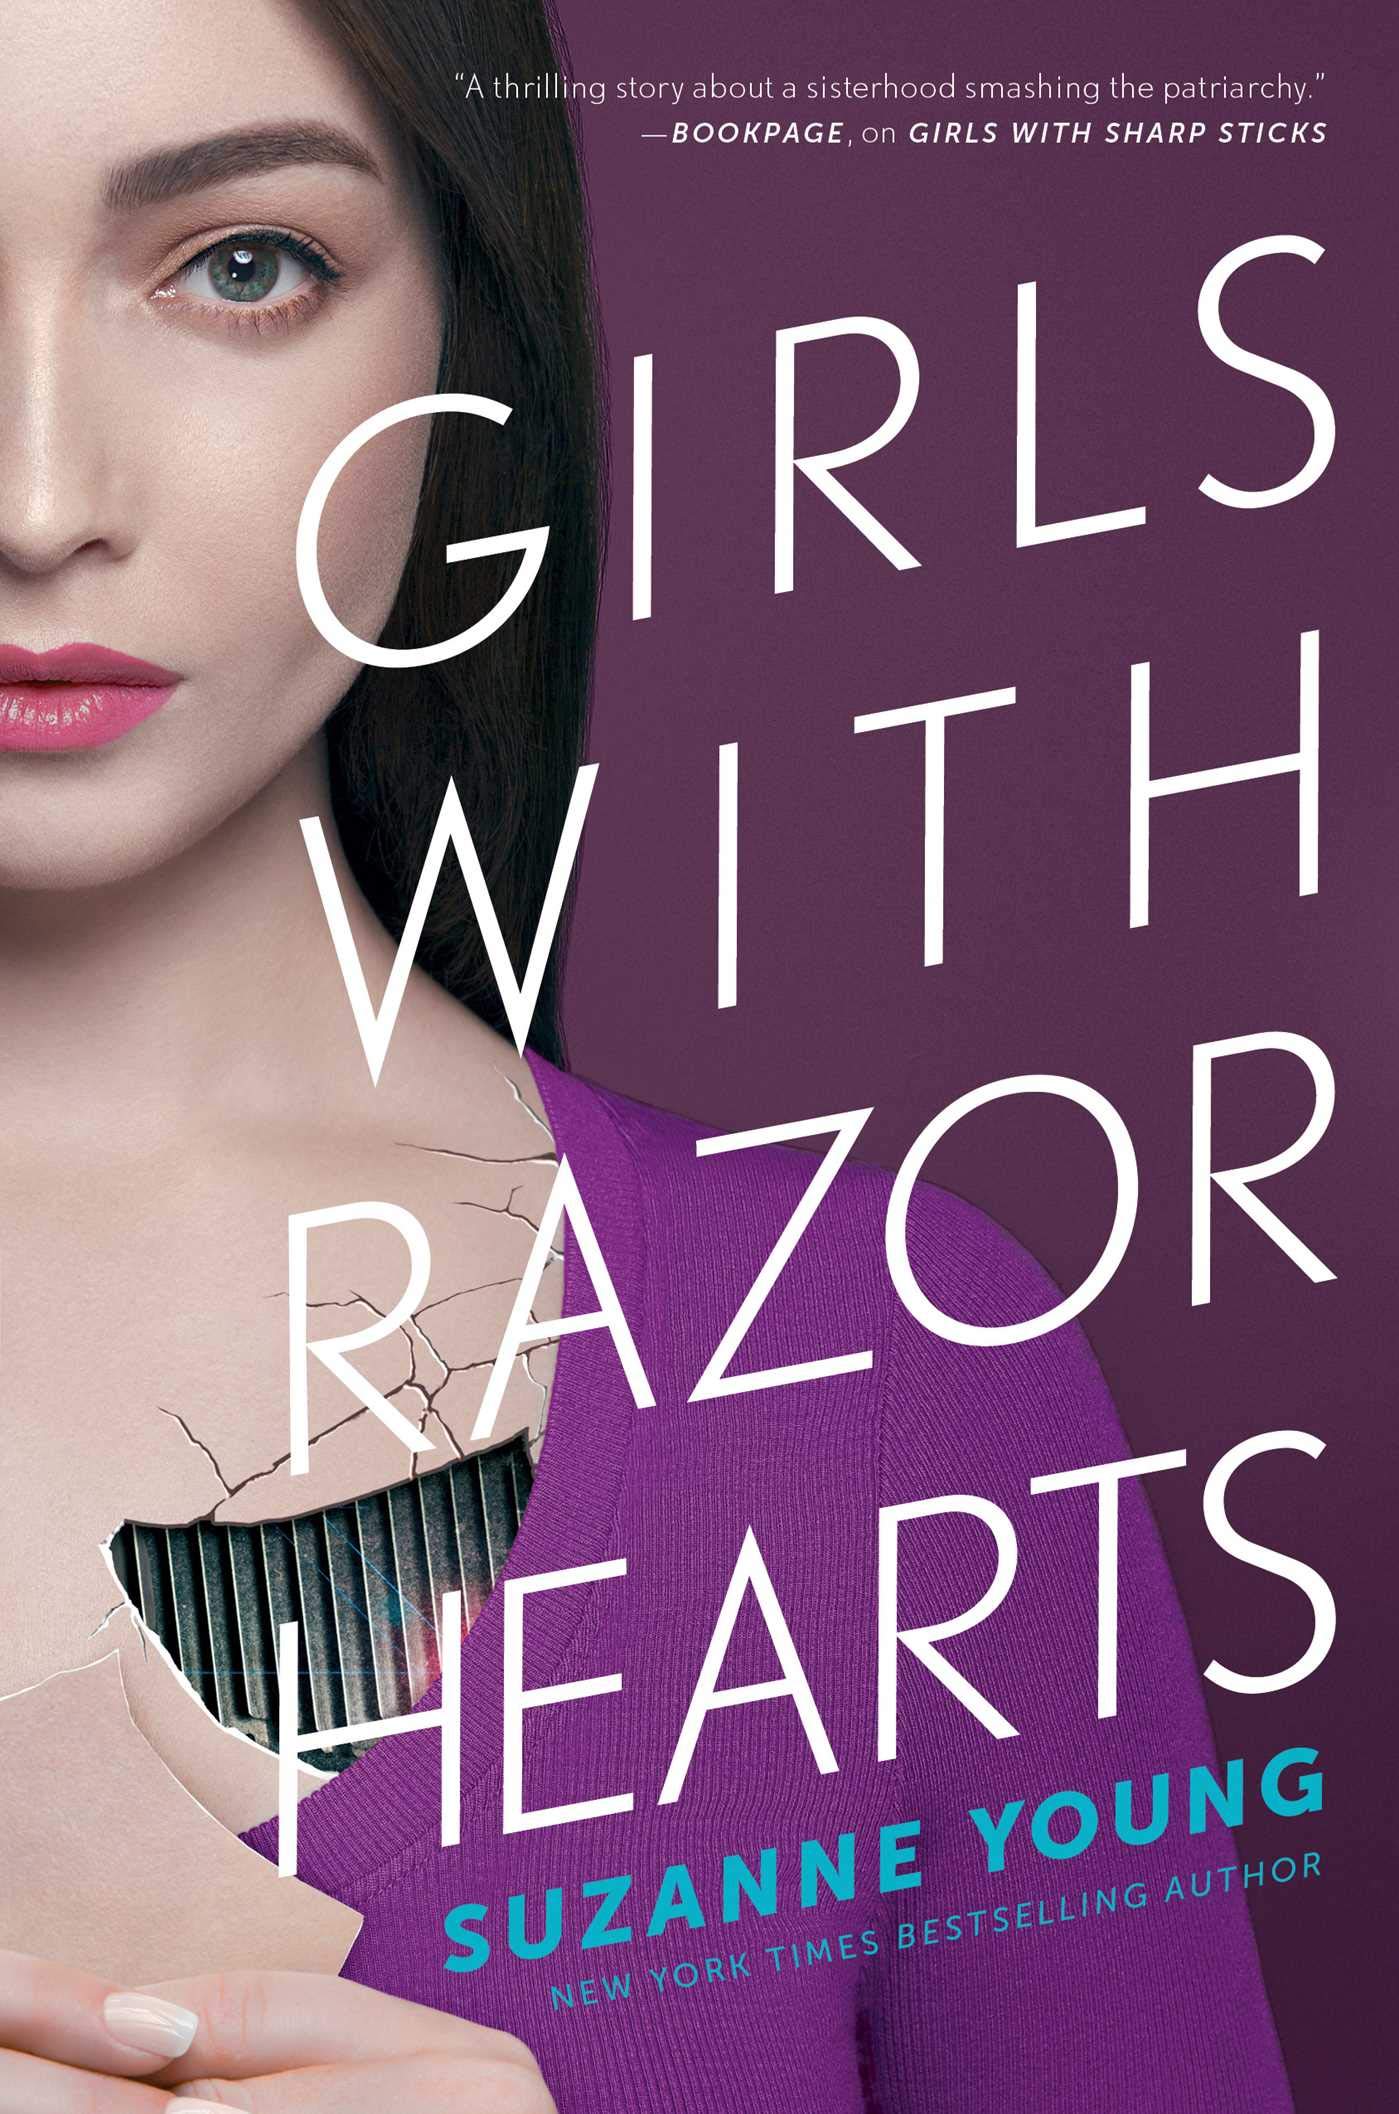 Girls with Razor Hearts book cover.